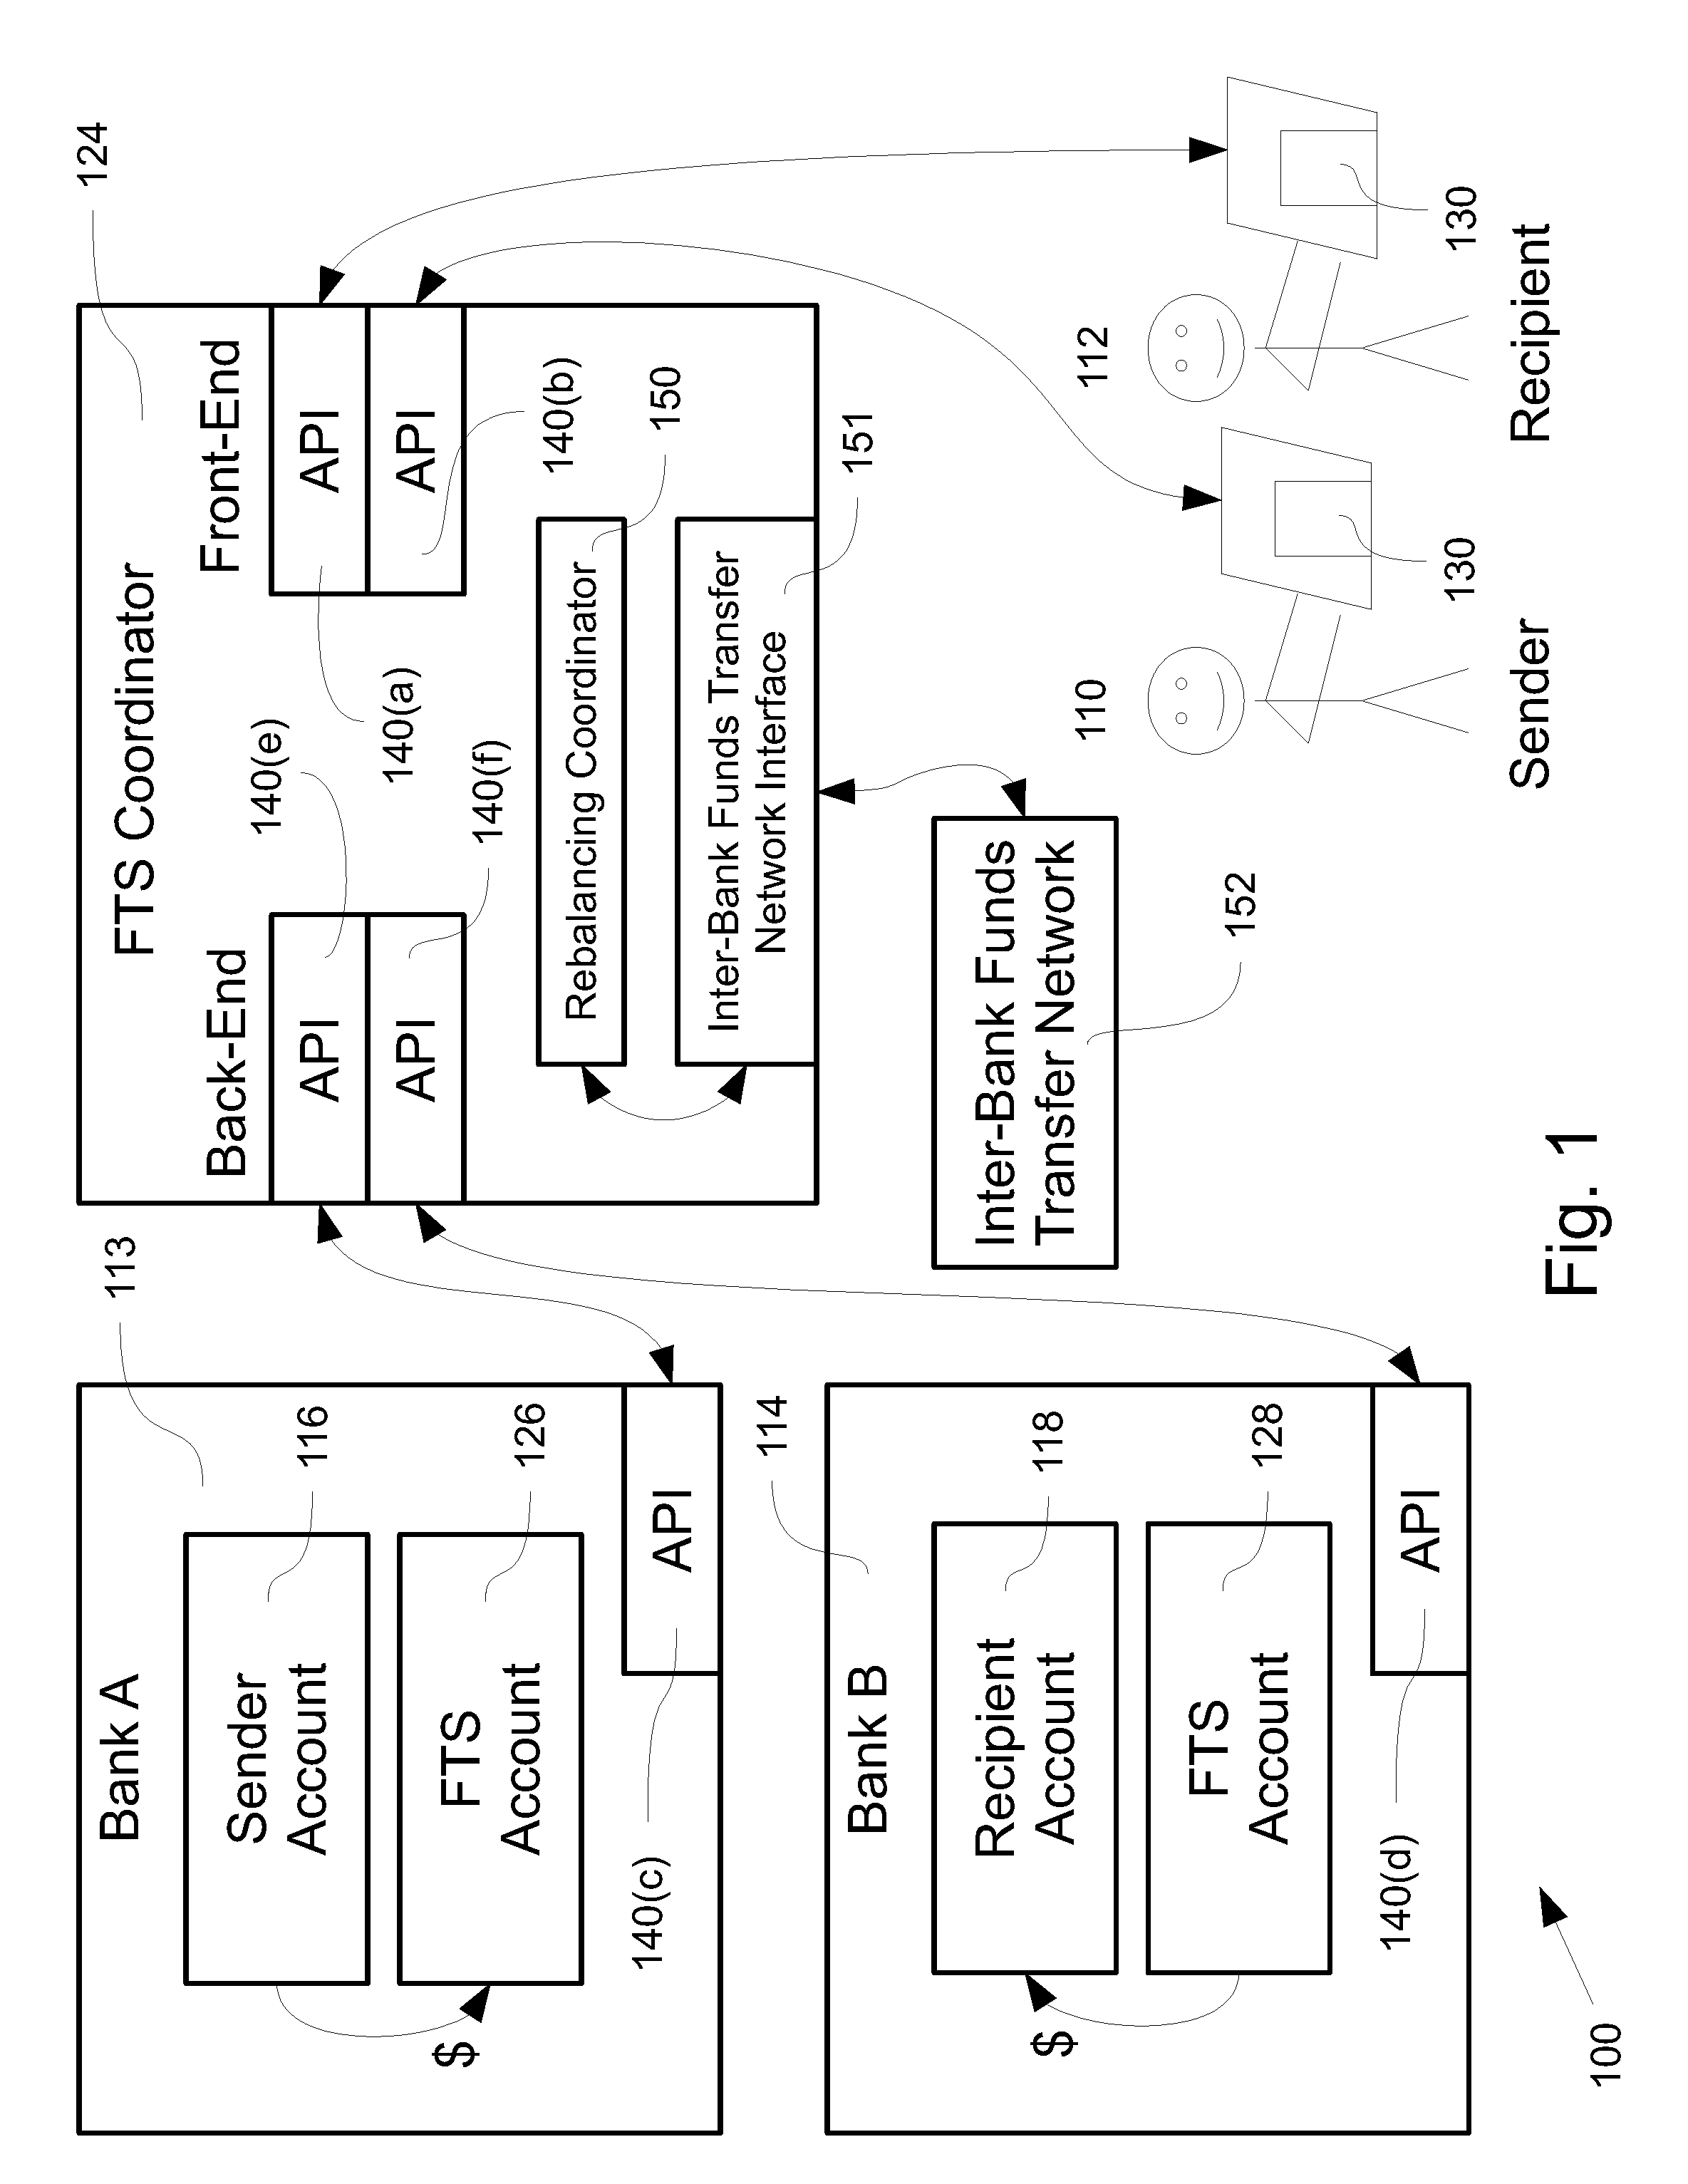 System and method for making low-cost instantaneous funds transfers